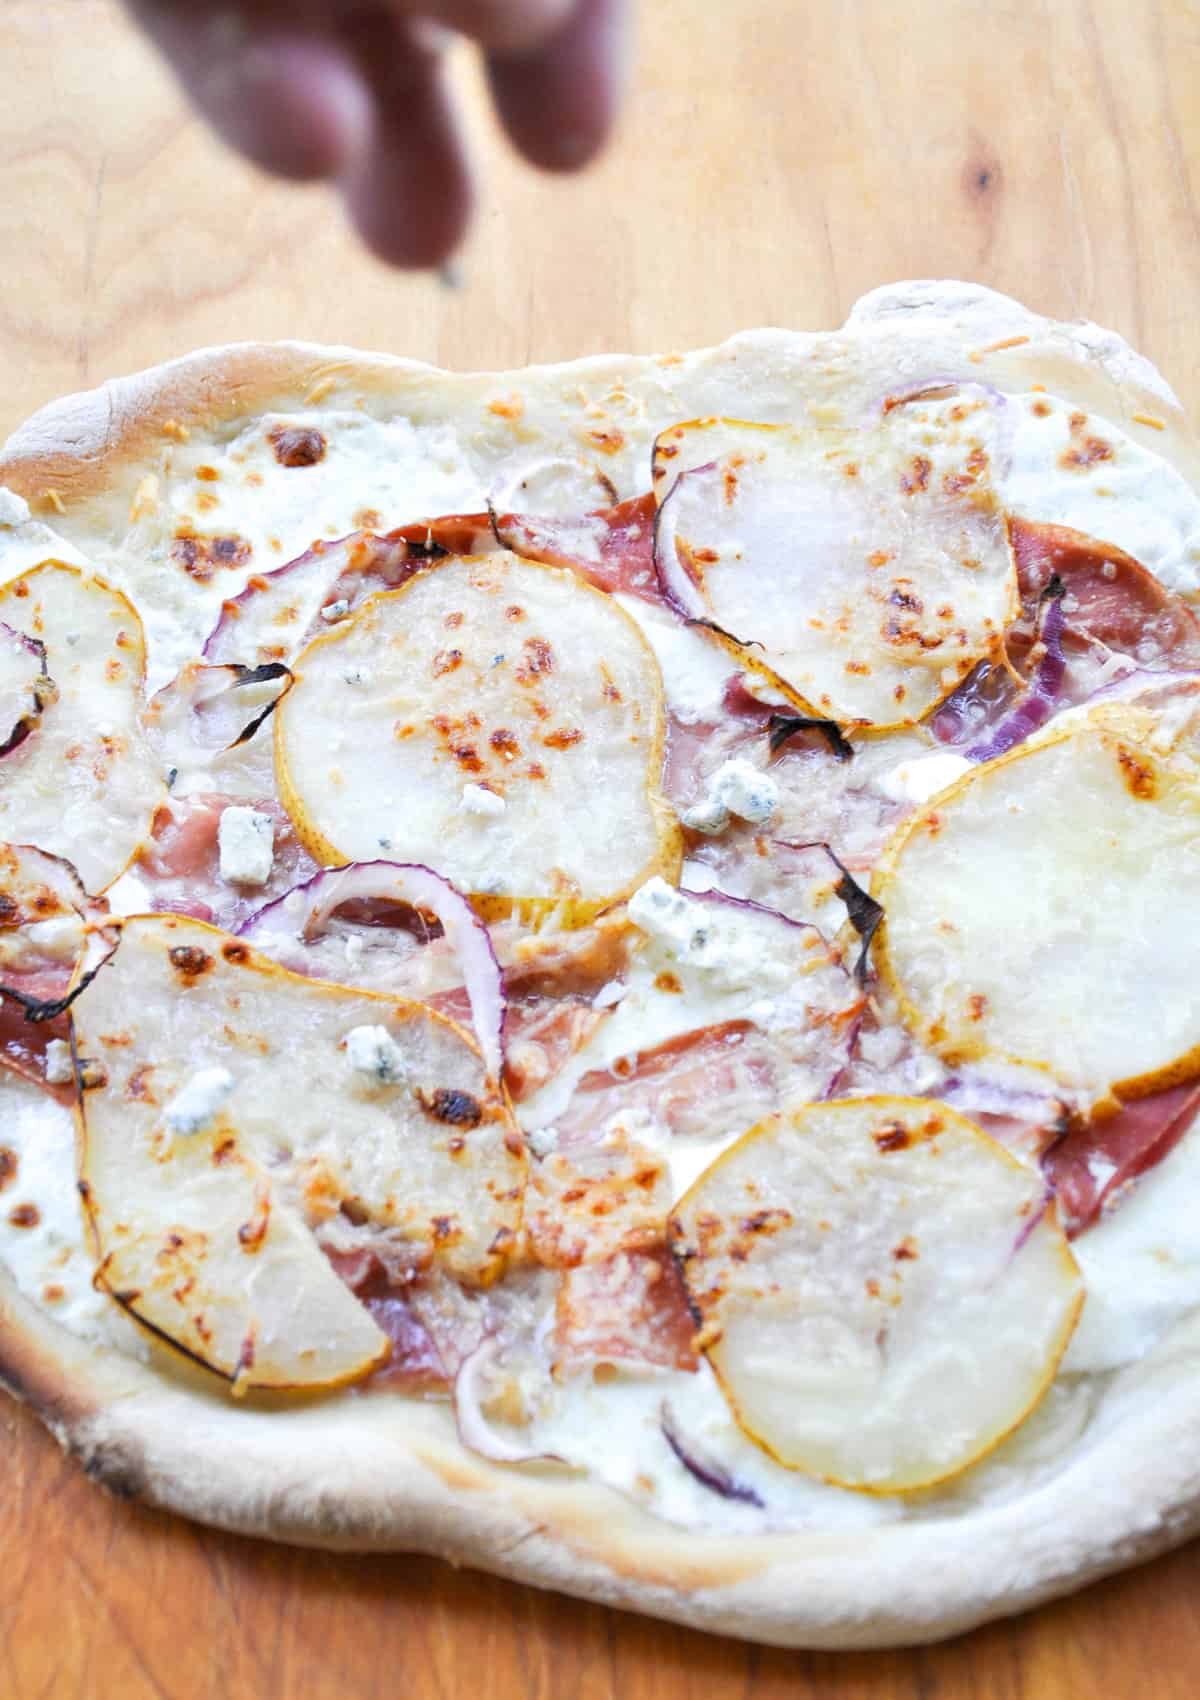 Pear & Prosciutto Pizza topped with red onion and gorgonzola. Yum-O-Licious!